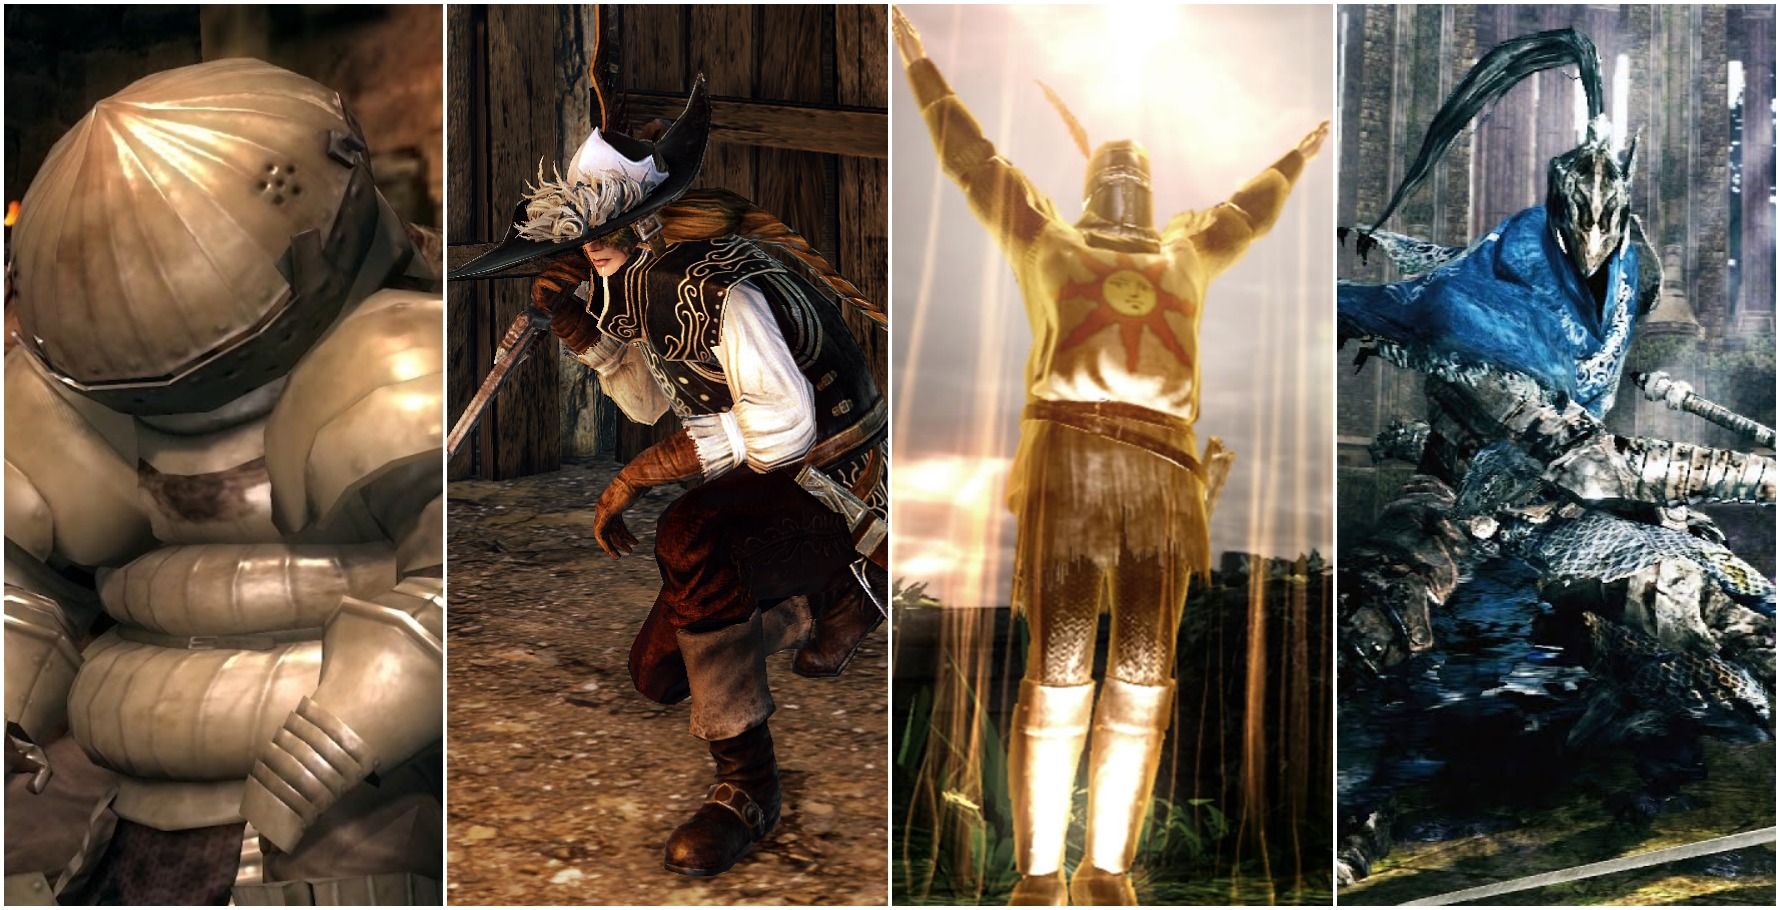 You Cried The 10 Most Tragic Dark Souls Characters Officially Ranked